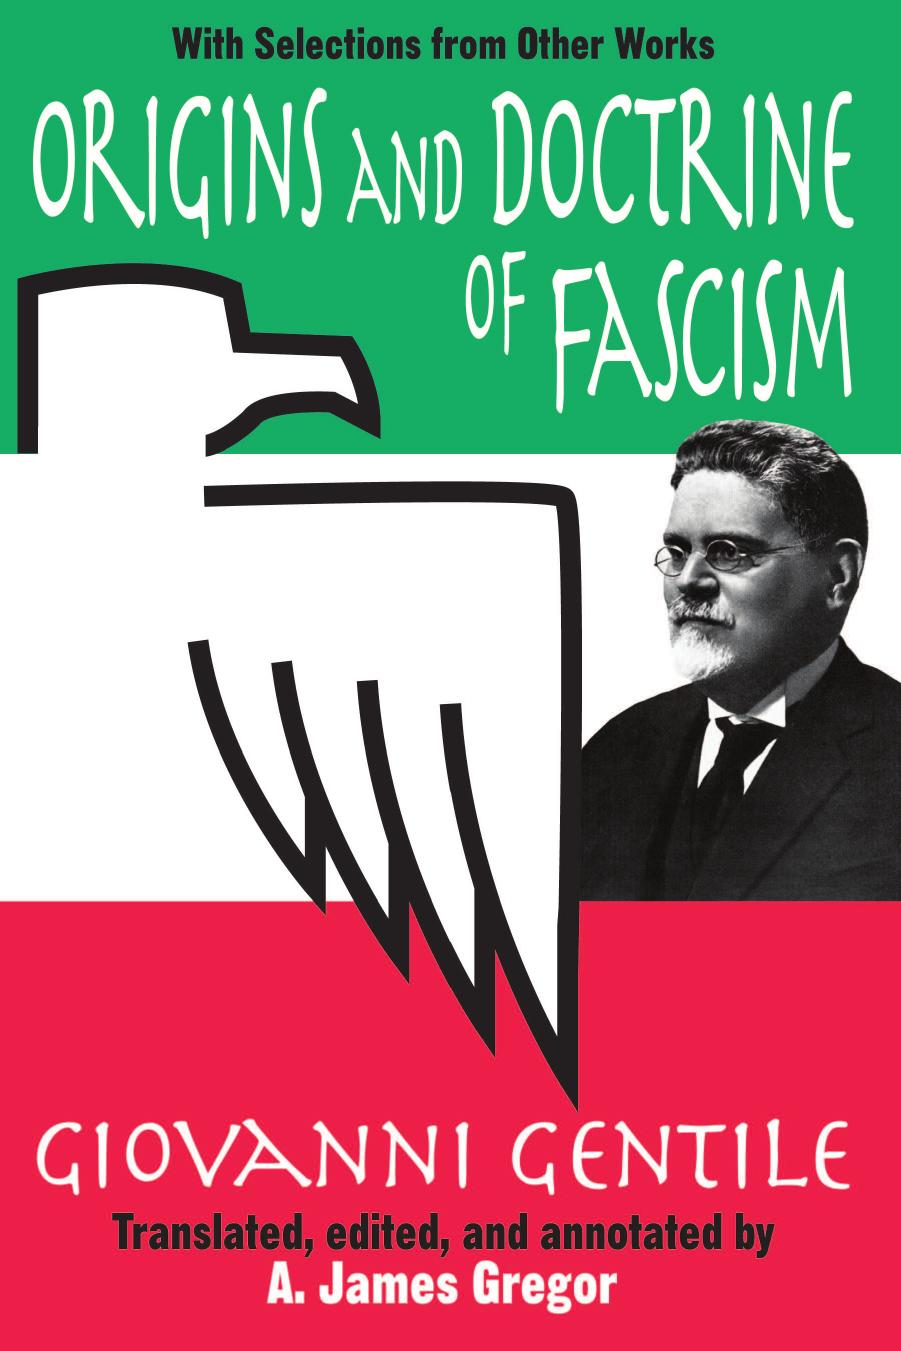 Origins And Doctrine Of Fascism: With Selections From Other Works by Giovanni Gentile A. James Gregor | Translator